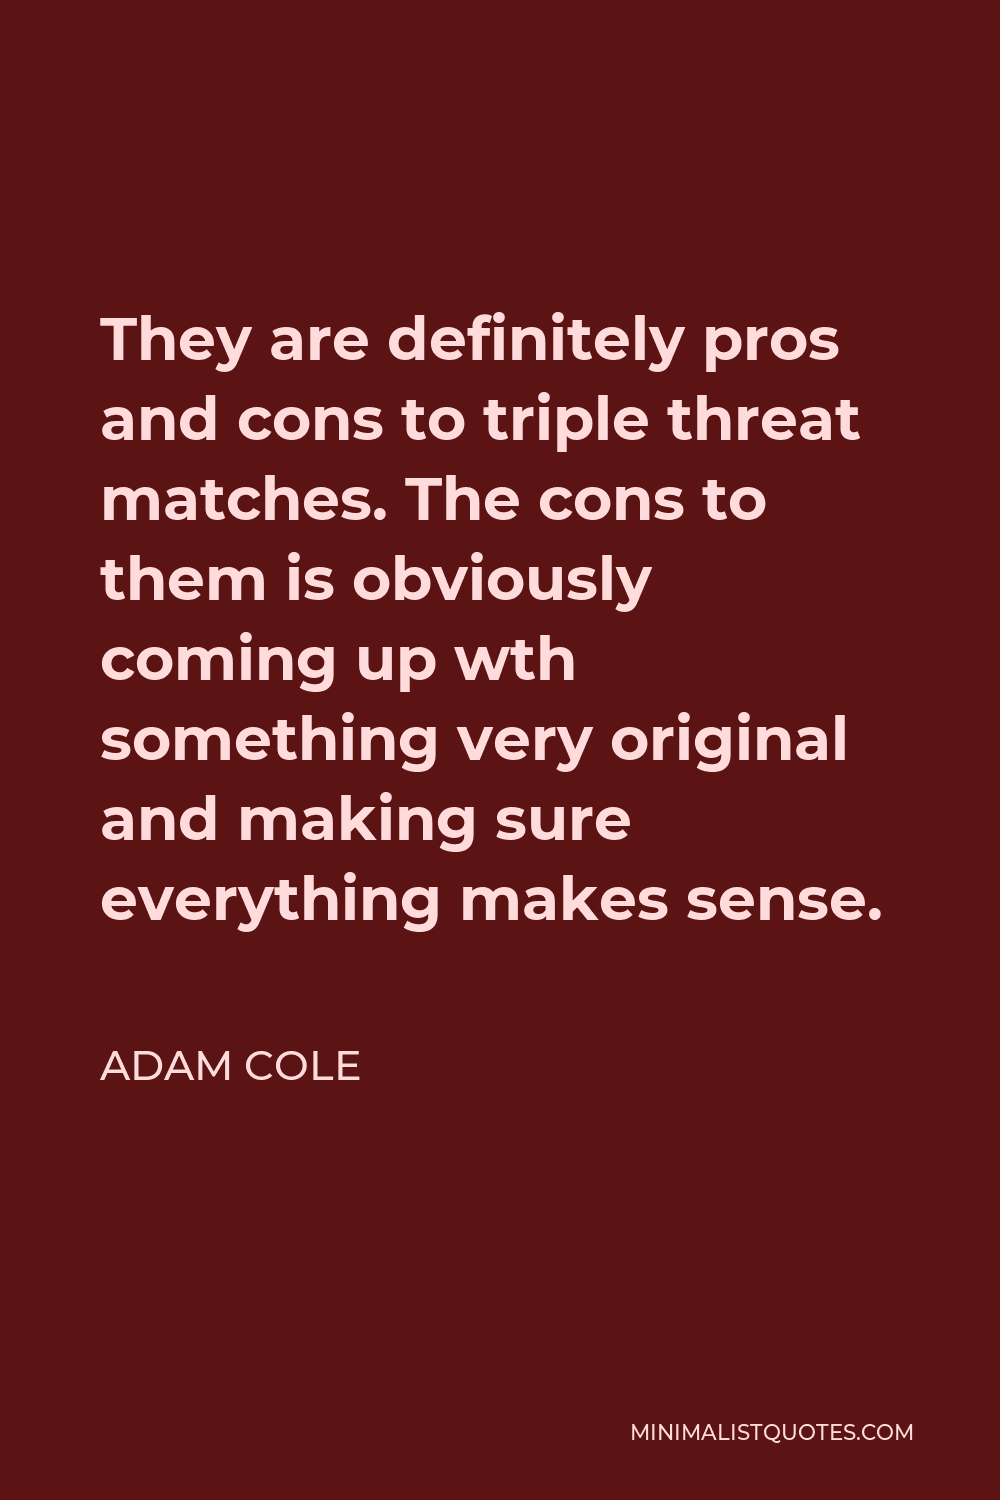 Adam Cole Quote - They are definitely pros and cons to triple threat matches. The cons to them is obviously coming up wth something very original and making sure everything makes sense.